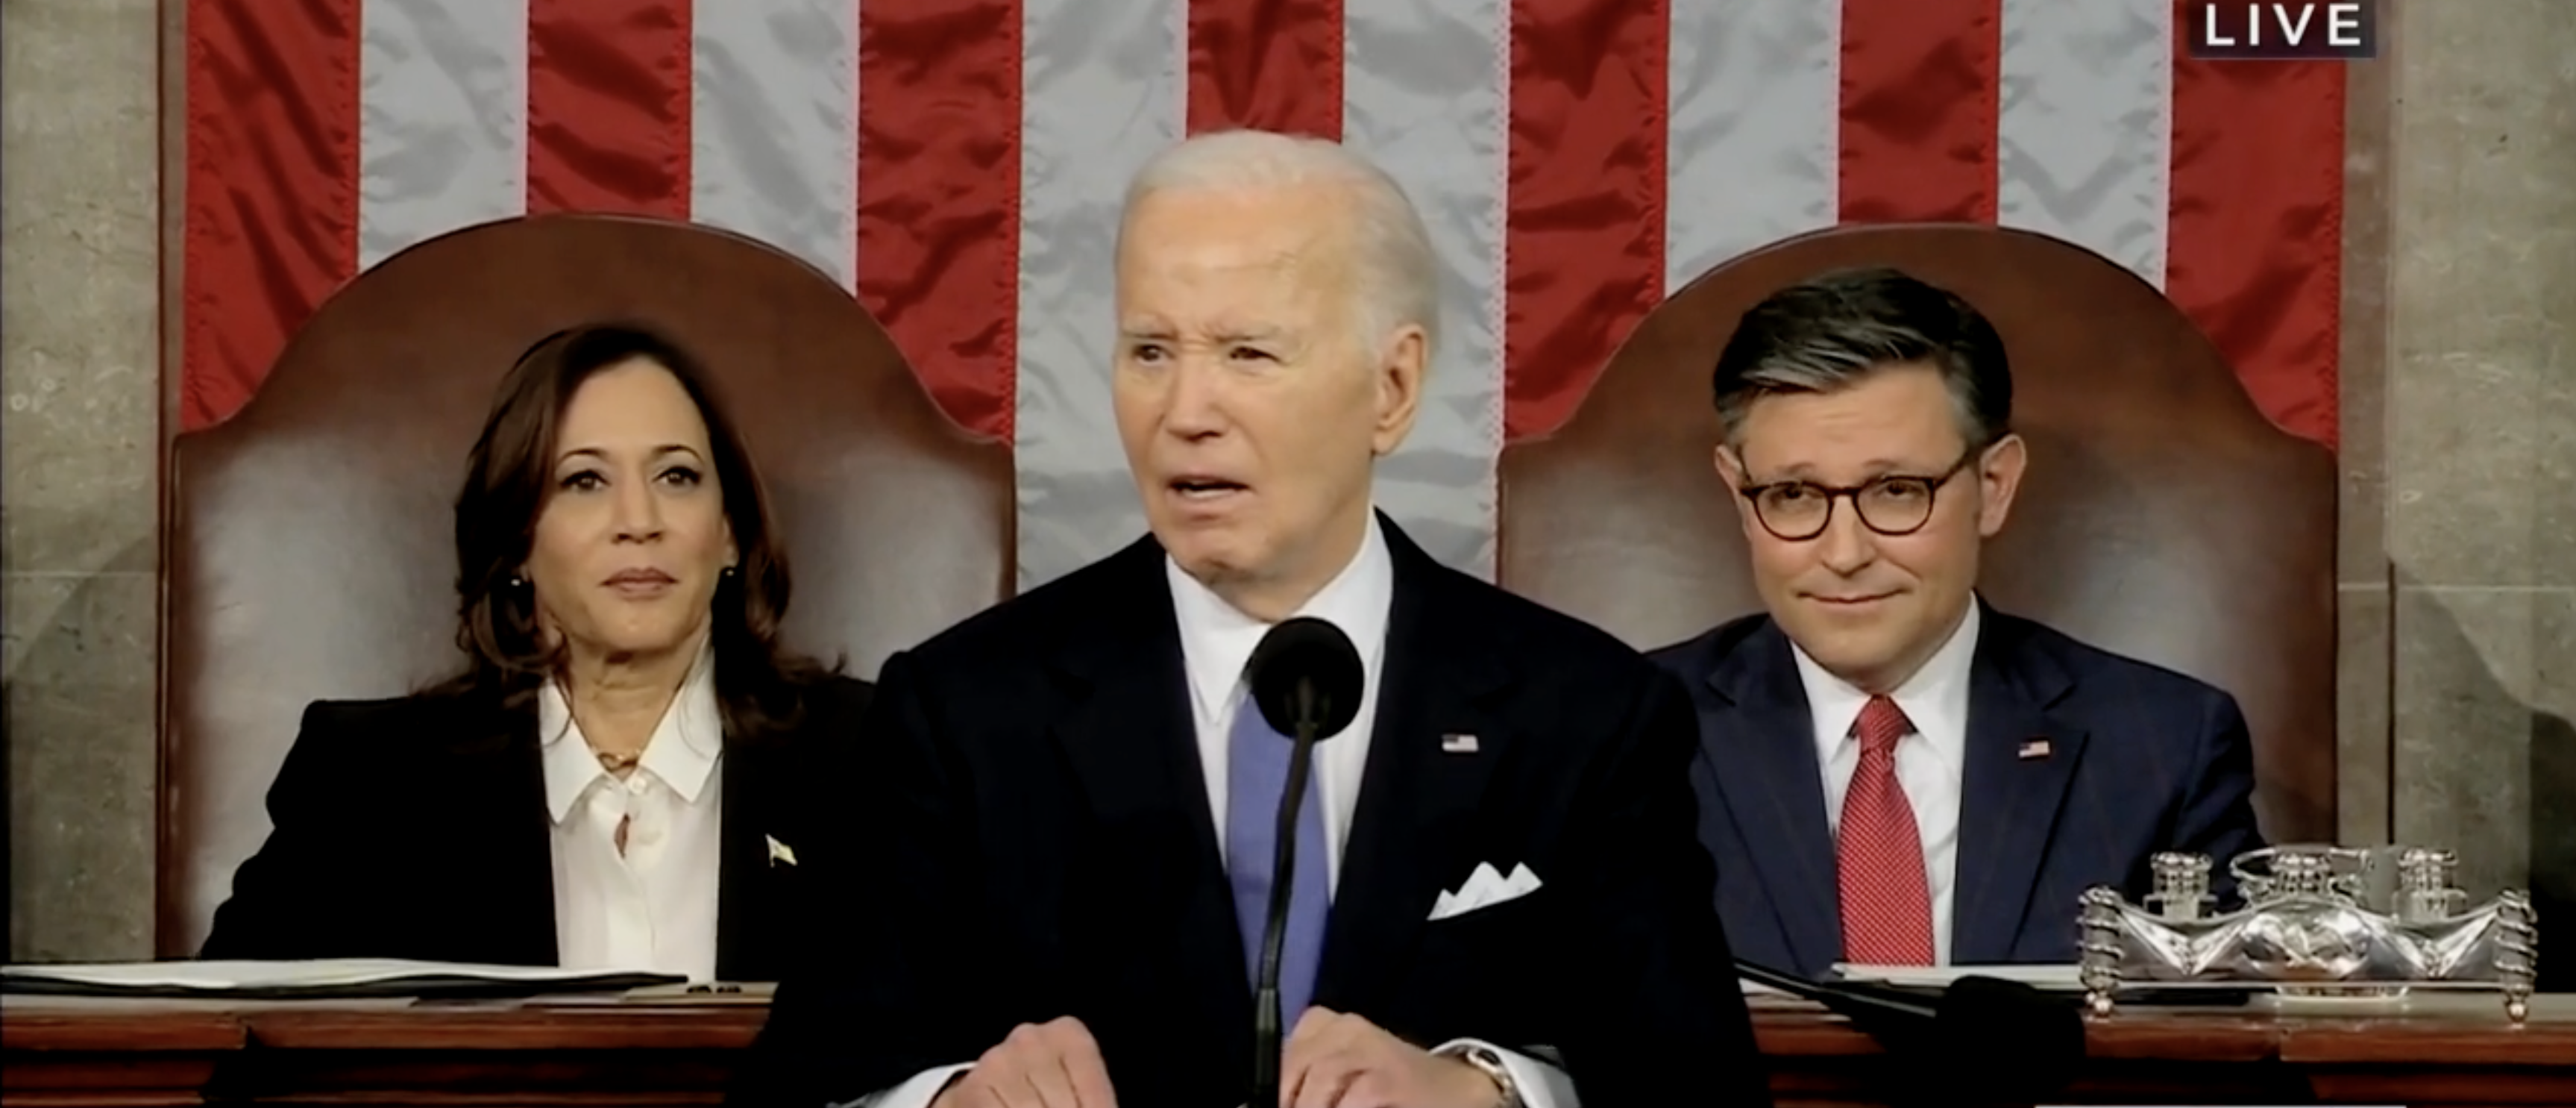 Members Bust Out Laughing As Biden Says He’s ‘Delivered Results In Fiscally Responsible Ways’